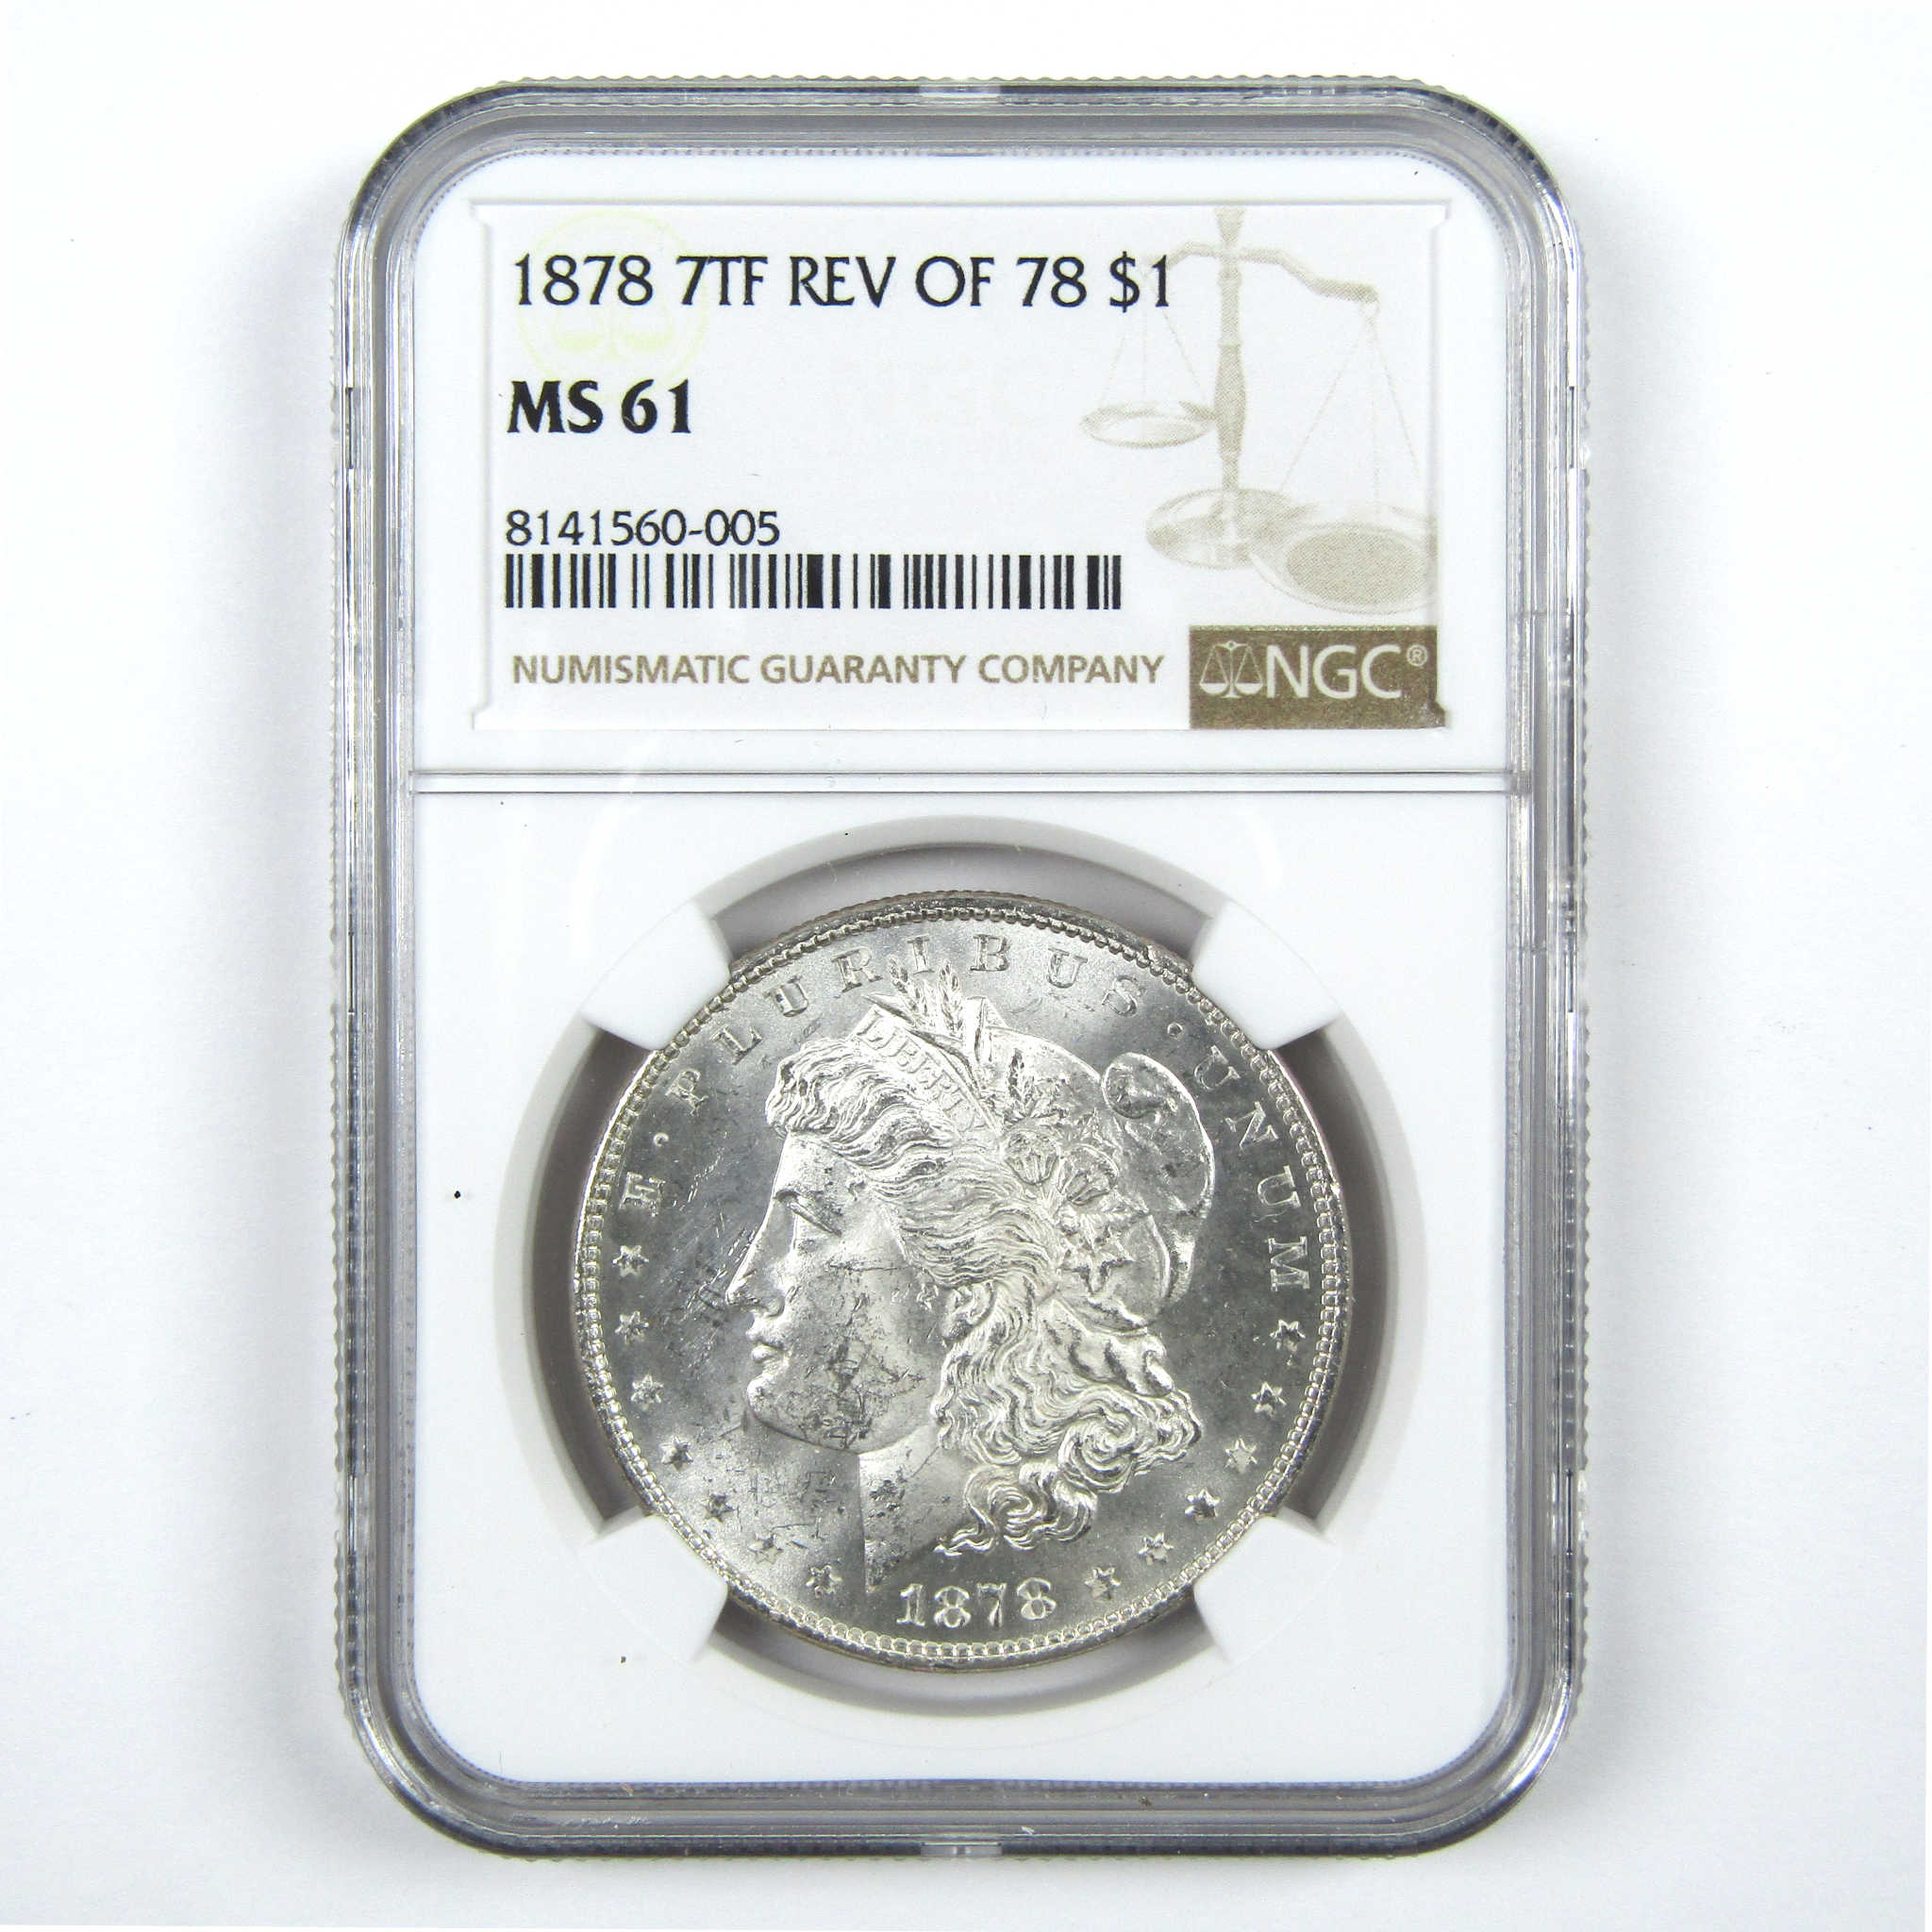 1878 7TF Rev 78 Morgan Dollar MS 61 NGC Uncirculated SKU:I14035 - Morgan coin - Morgan silver dollar - Morgan silver dollar for sale - Profile Coins &amp; Collectibles